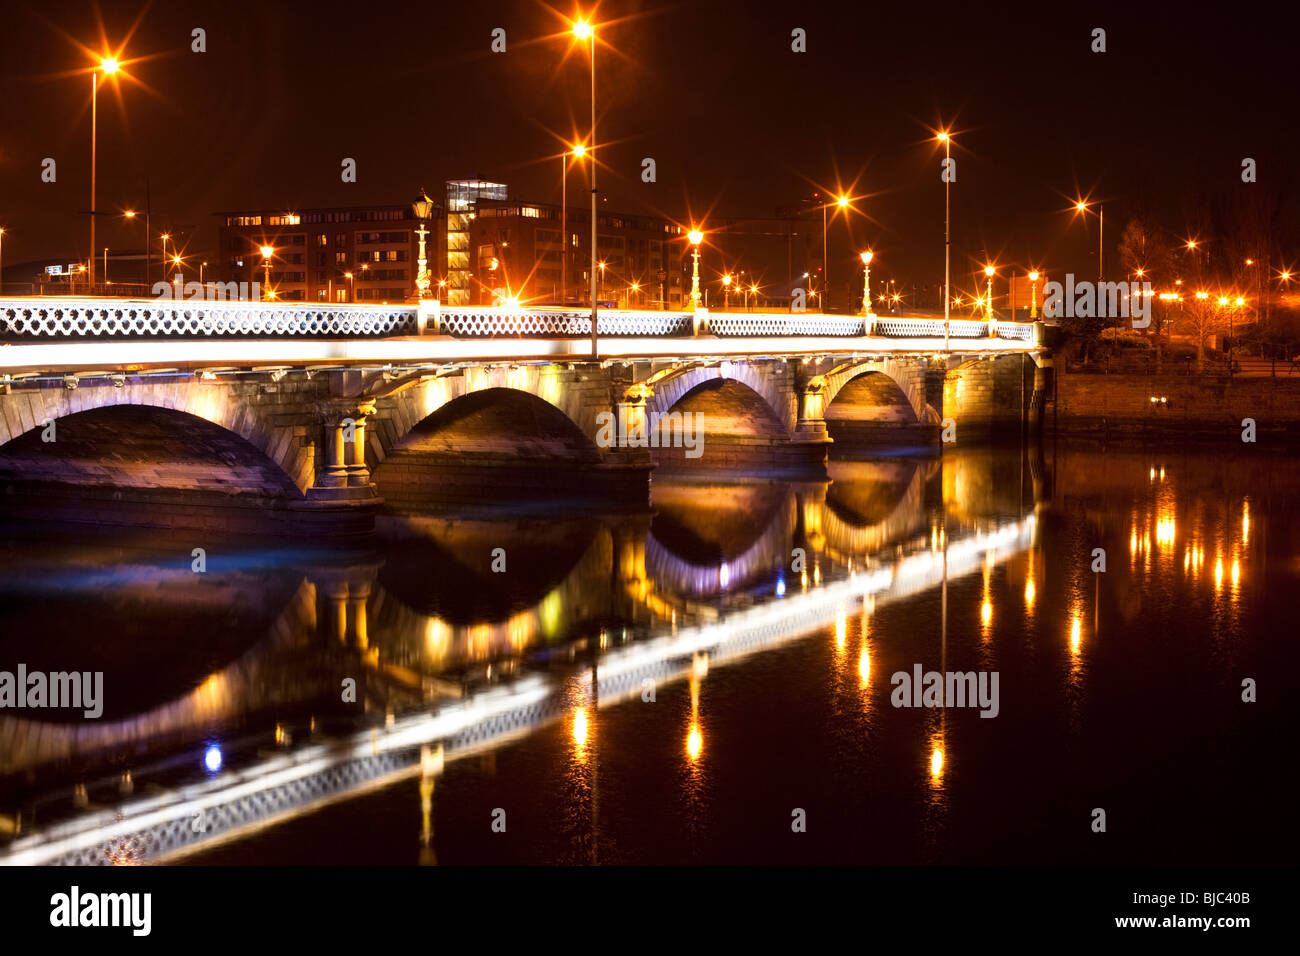 Lights on the Queen's Road Bridge reflected by the water of the River Lagan, Belfast, Northern Ireland Stock Photo